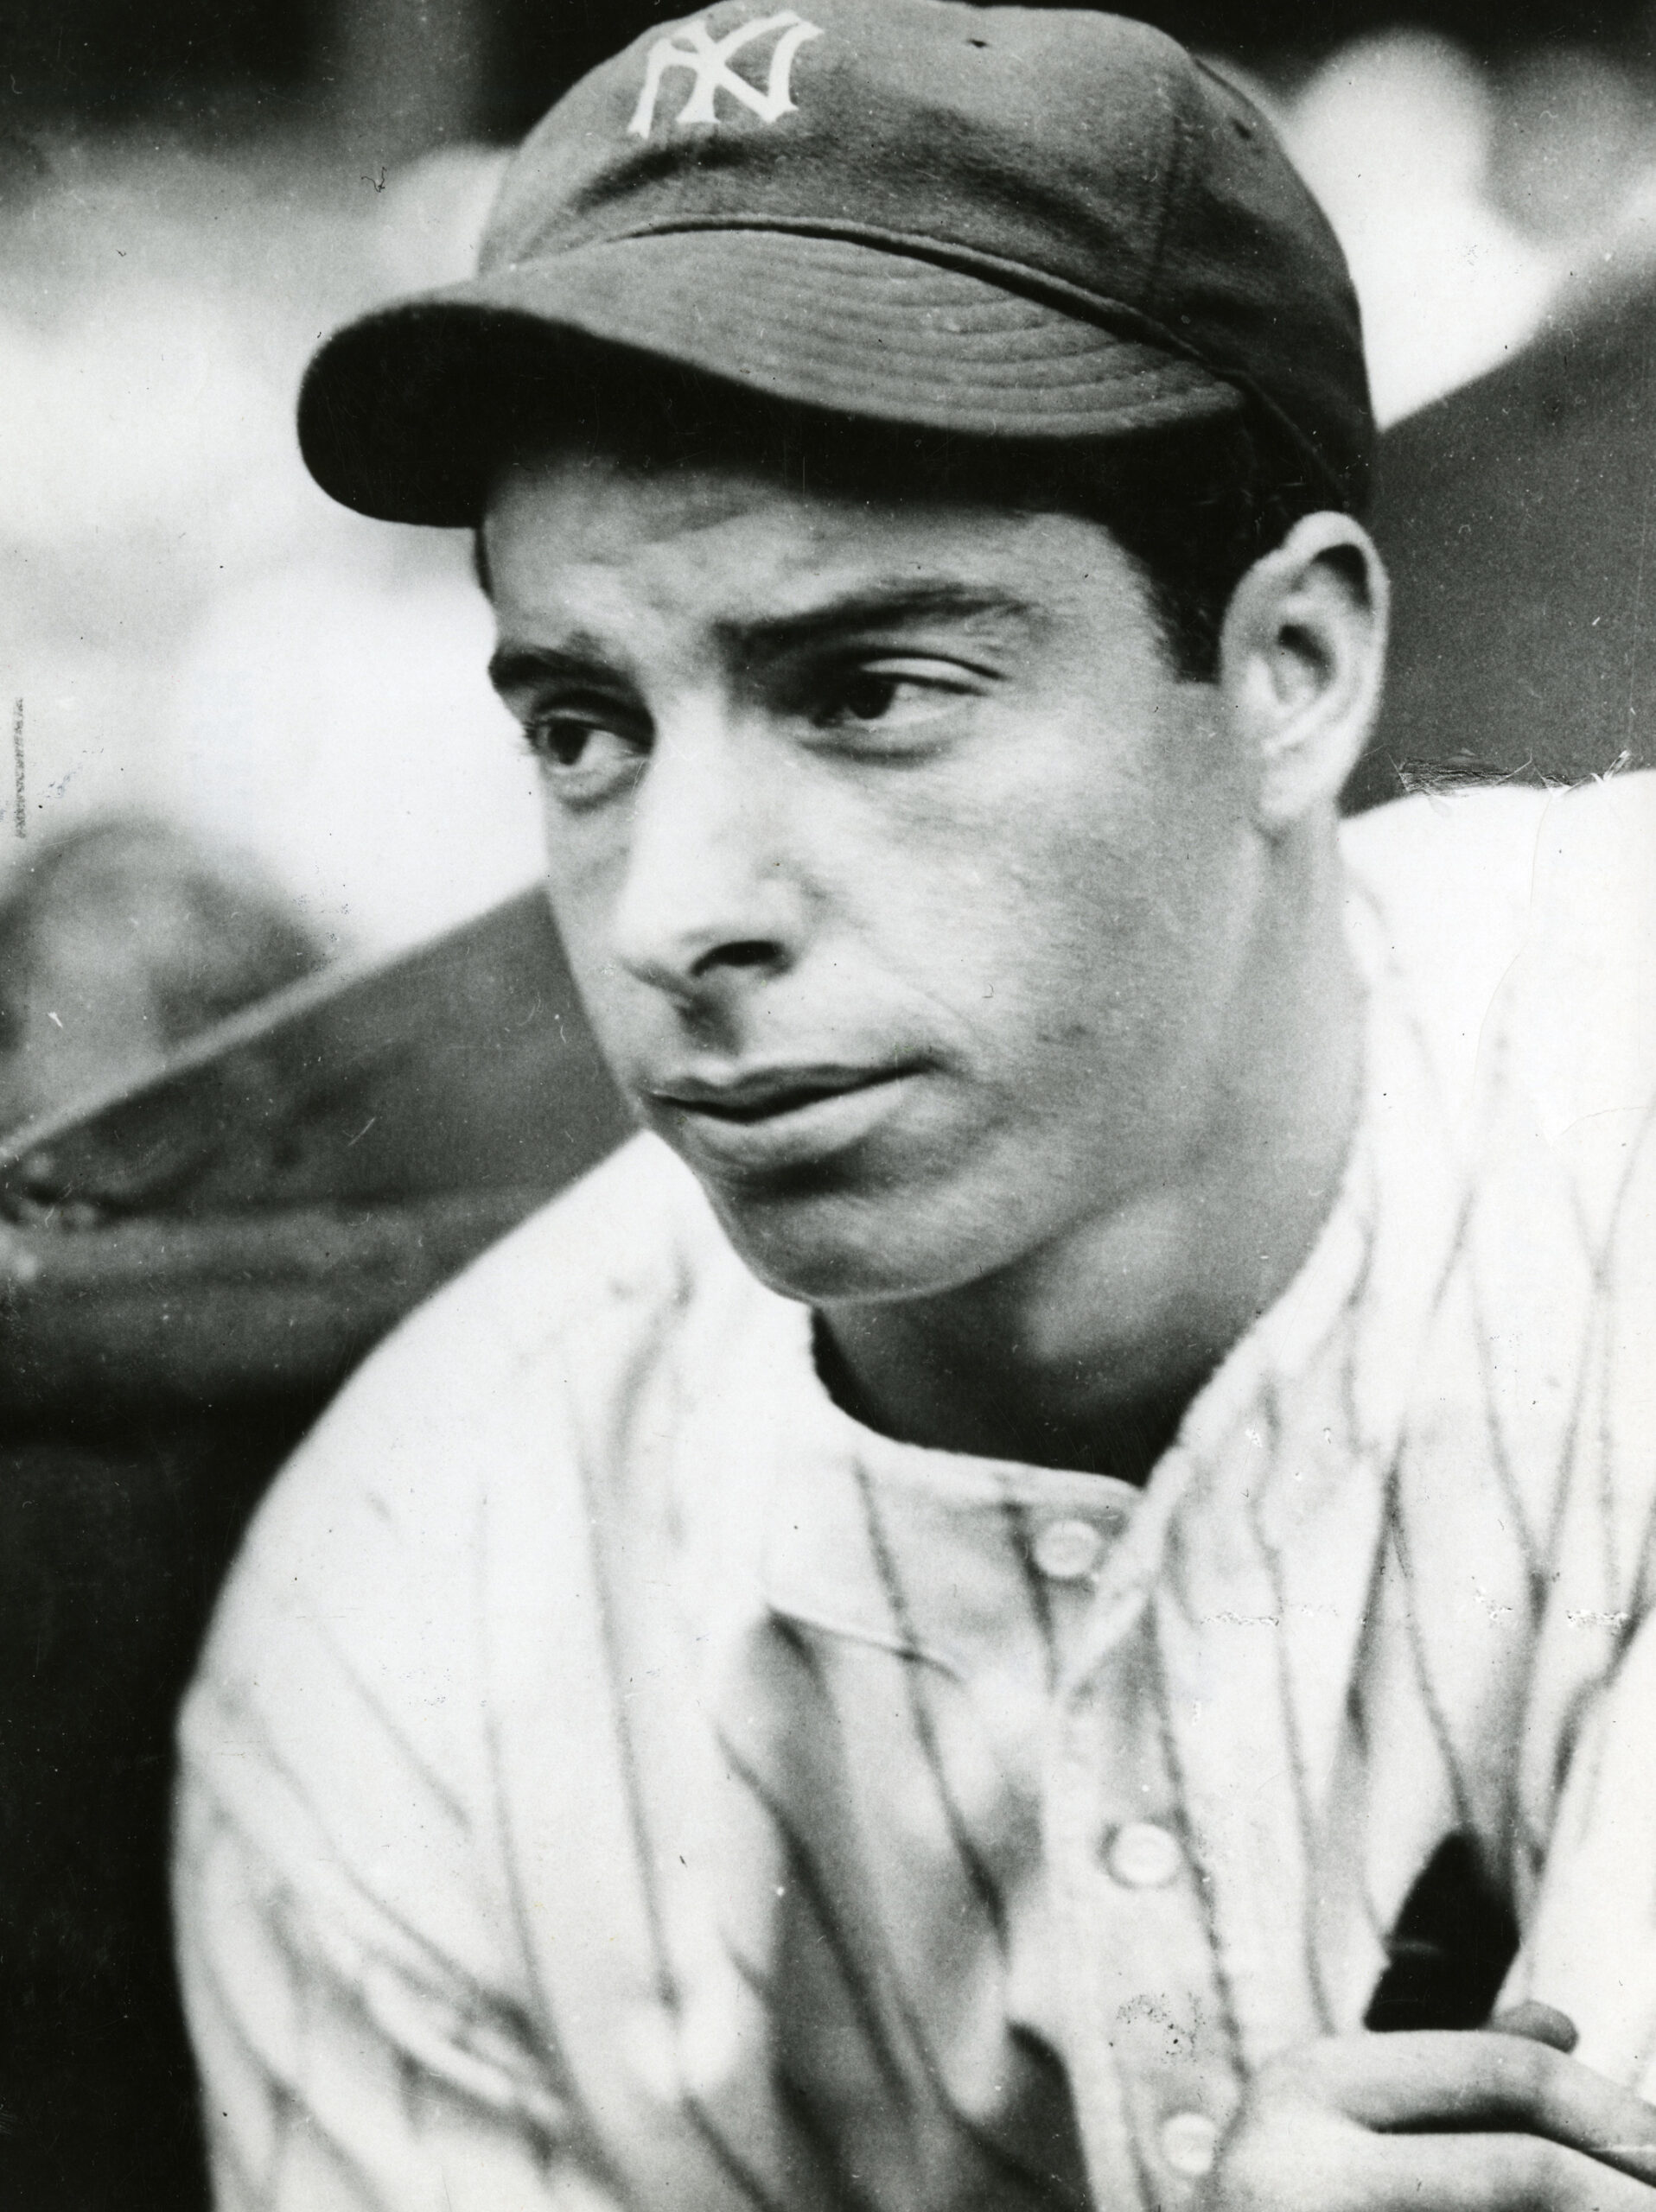 Where Have You Gone Joe DiMaggio, Our Nation Turns Its' Lonely Eyes To You 